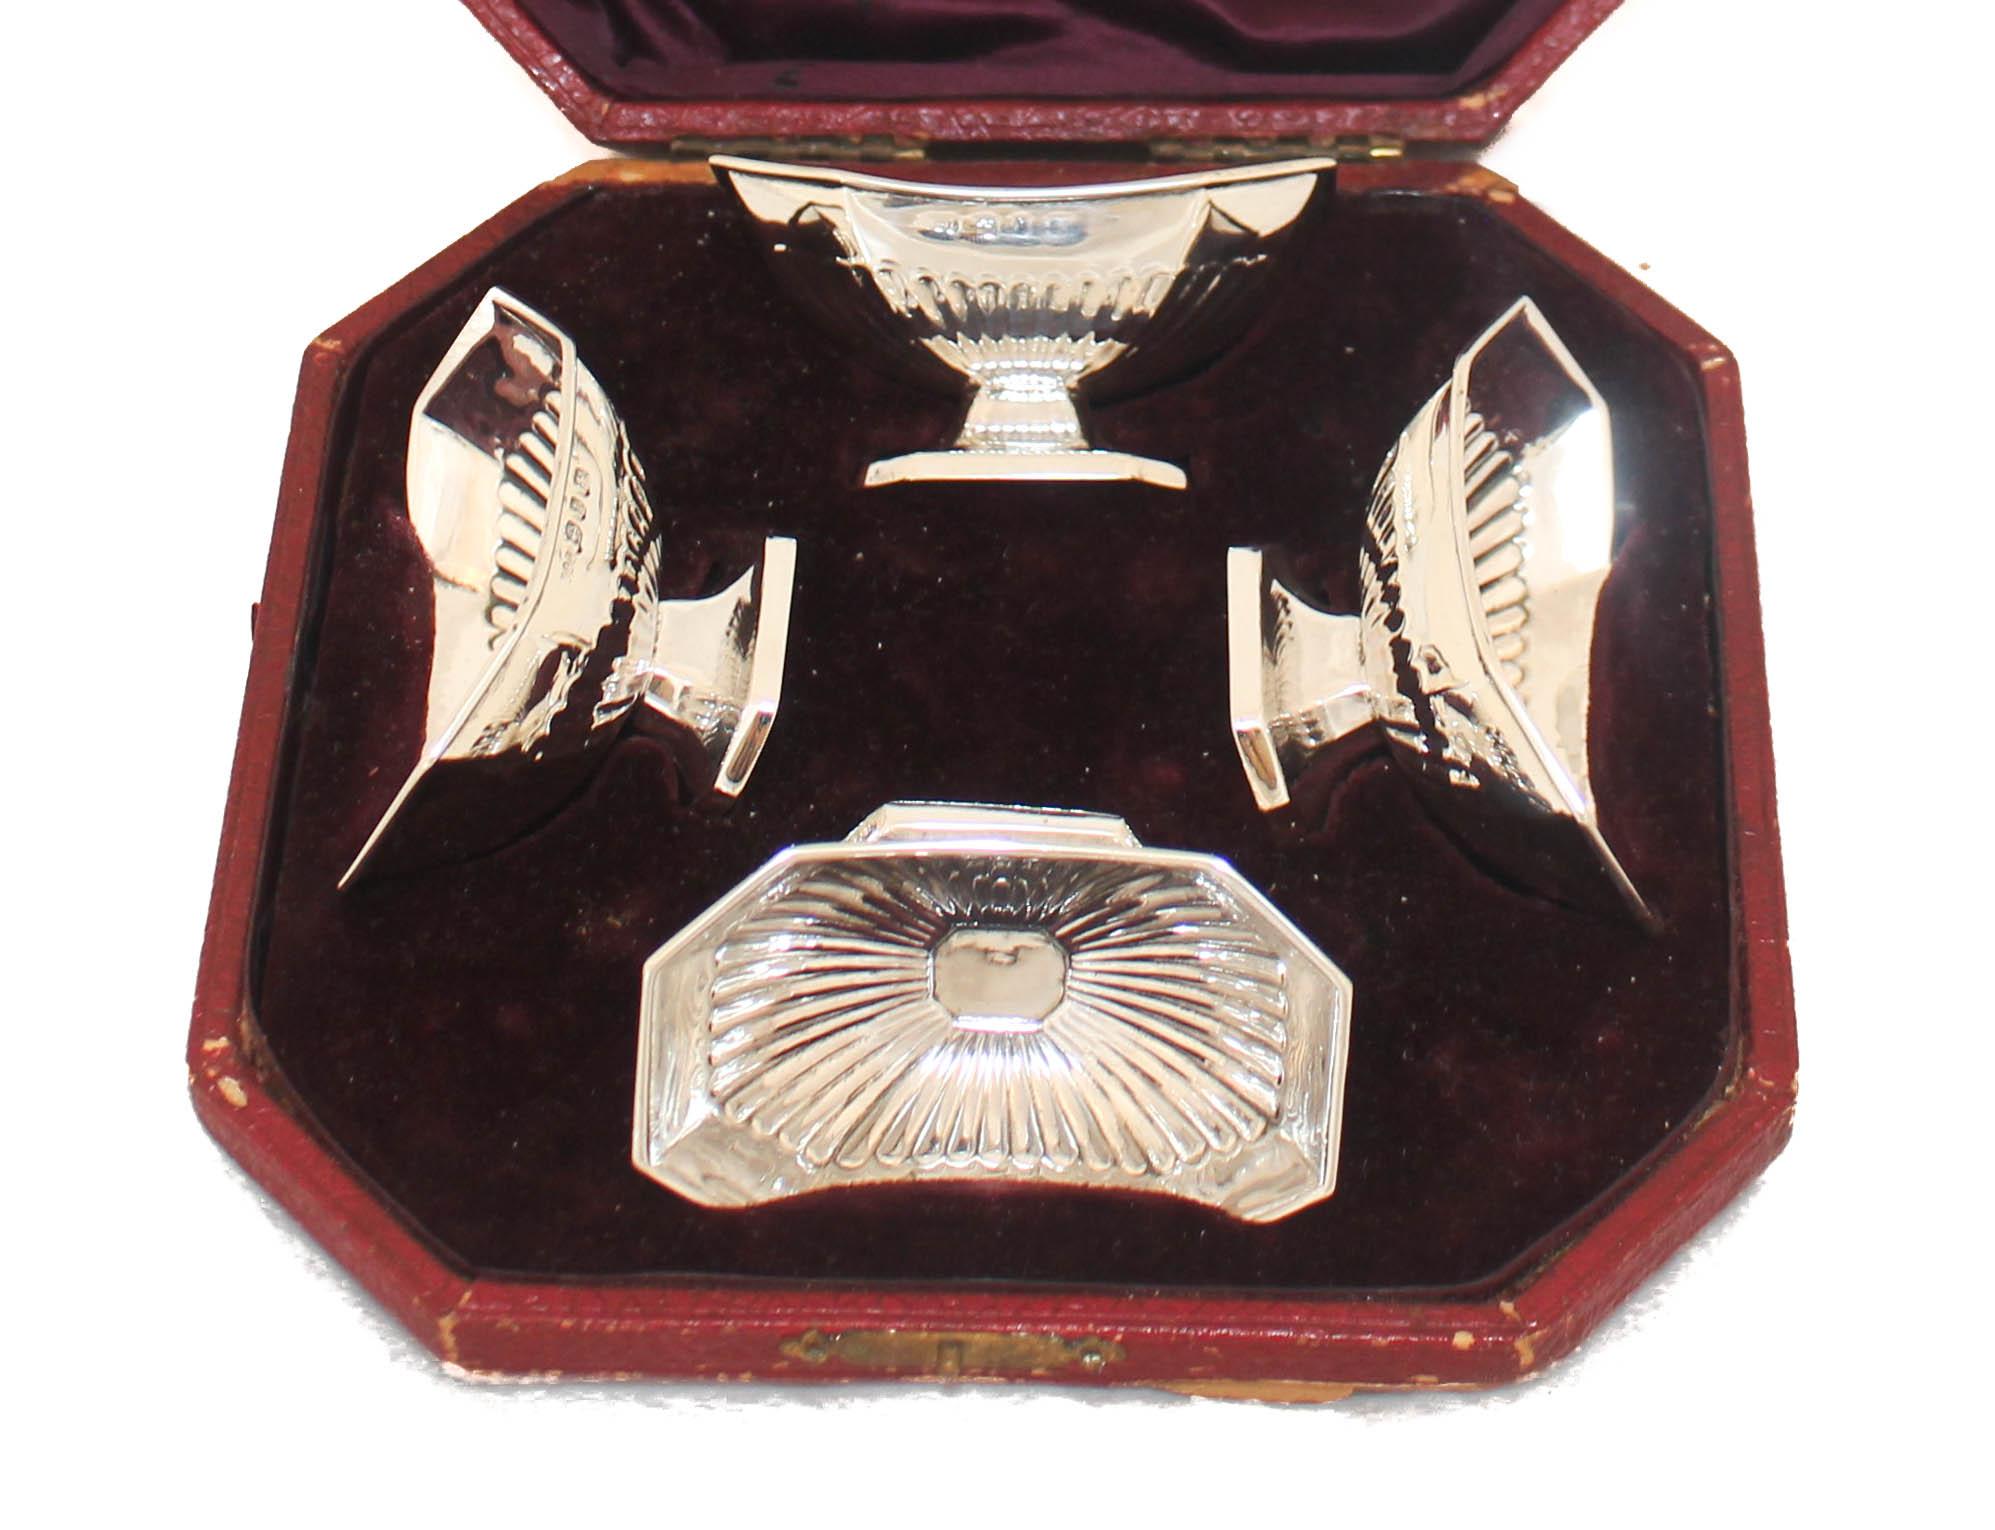 We are delighted to offer you this set of four sterling silver salt cellars from England, hallmarked 1878. We have the original case that they came in; they were sold at Alexander Brothers Limited in Liverpool, England. Each salt cellar fits into